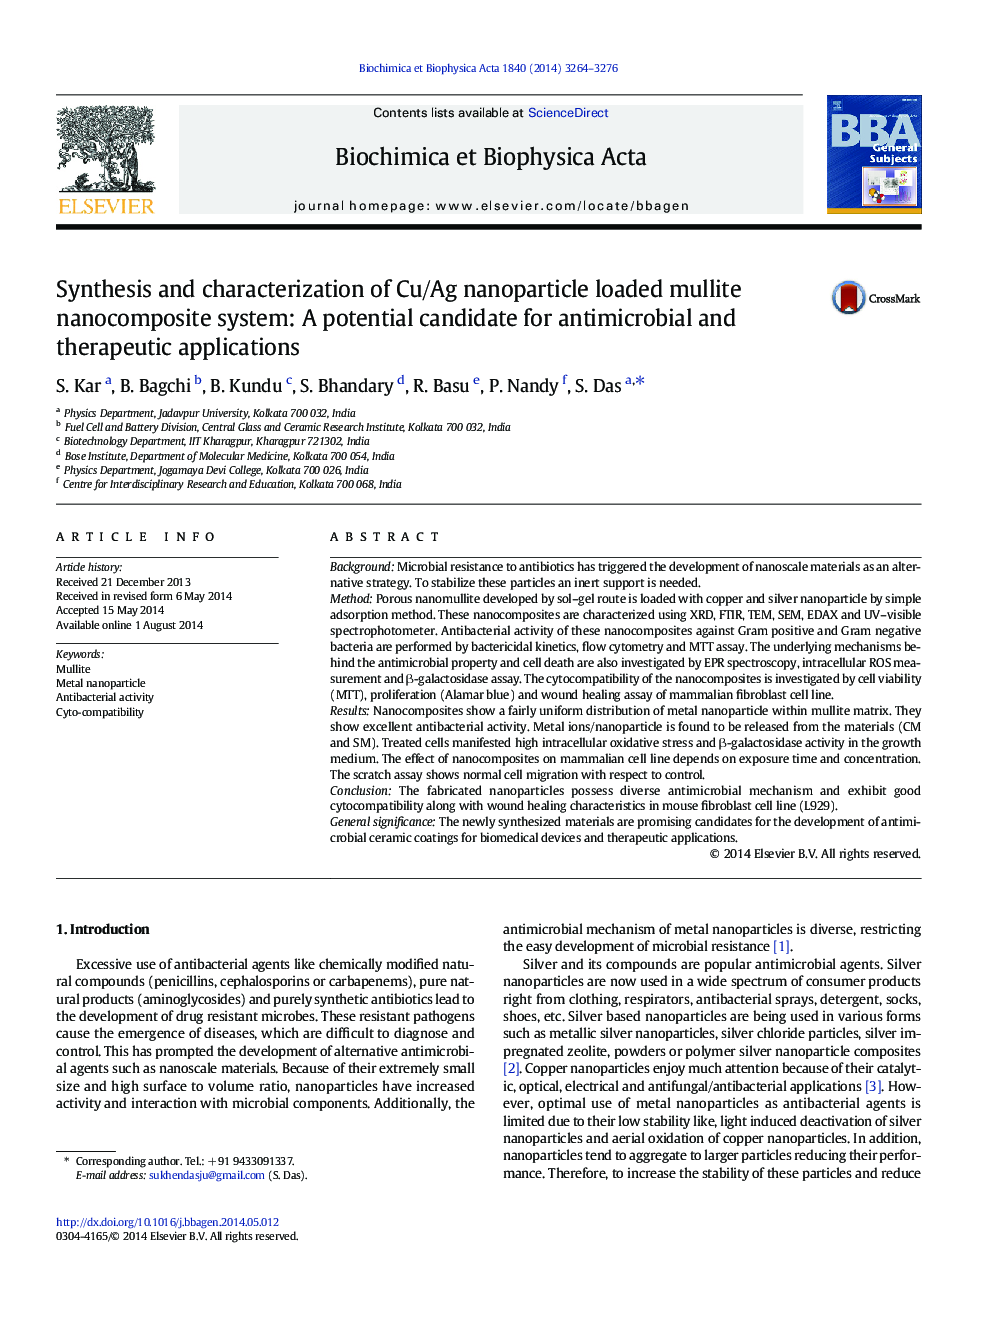 Synthesis and characterization of Cu/Ag nanoparticle loaded mullite nanocomposite system: A potential candidate for antimicrobial and therapeutic applications